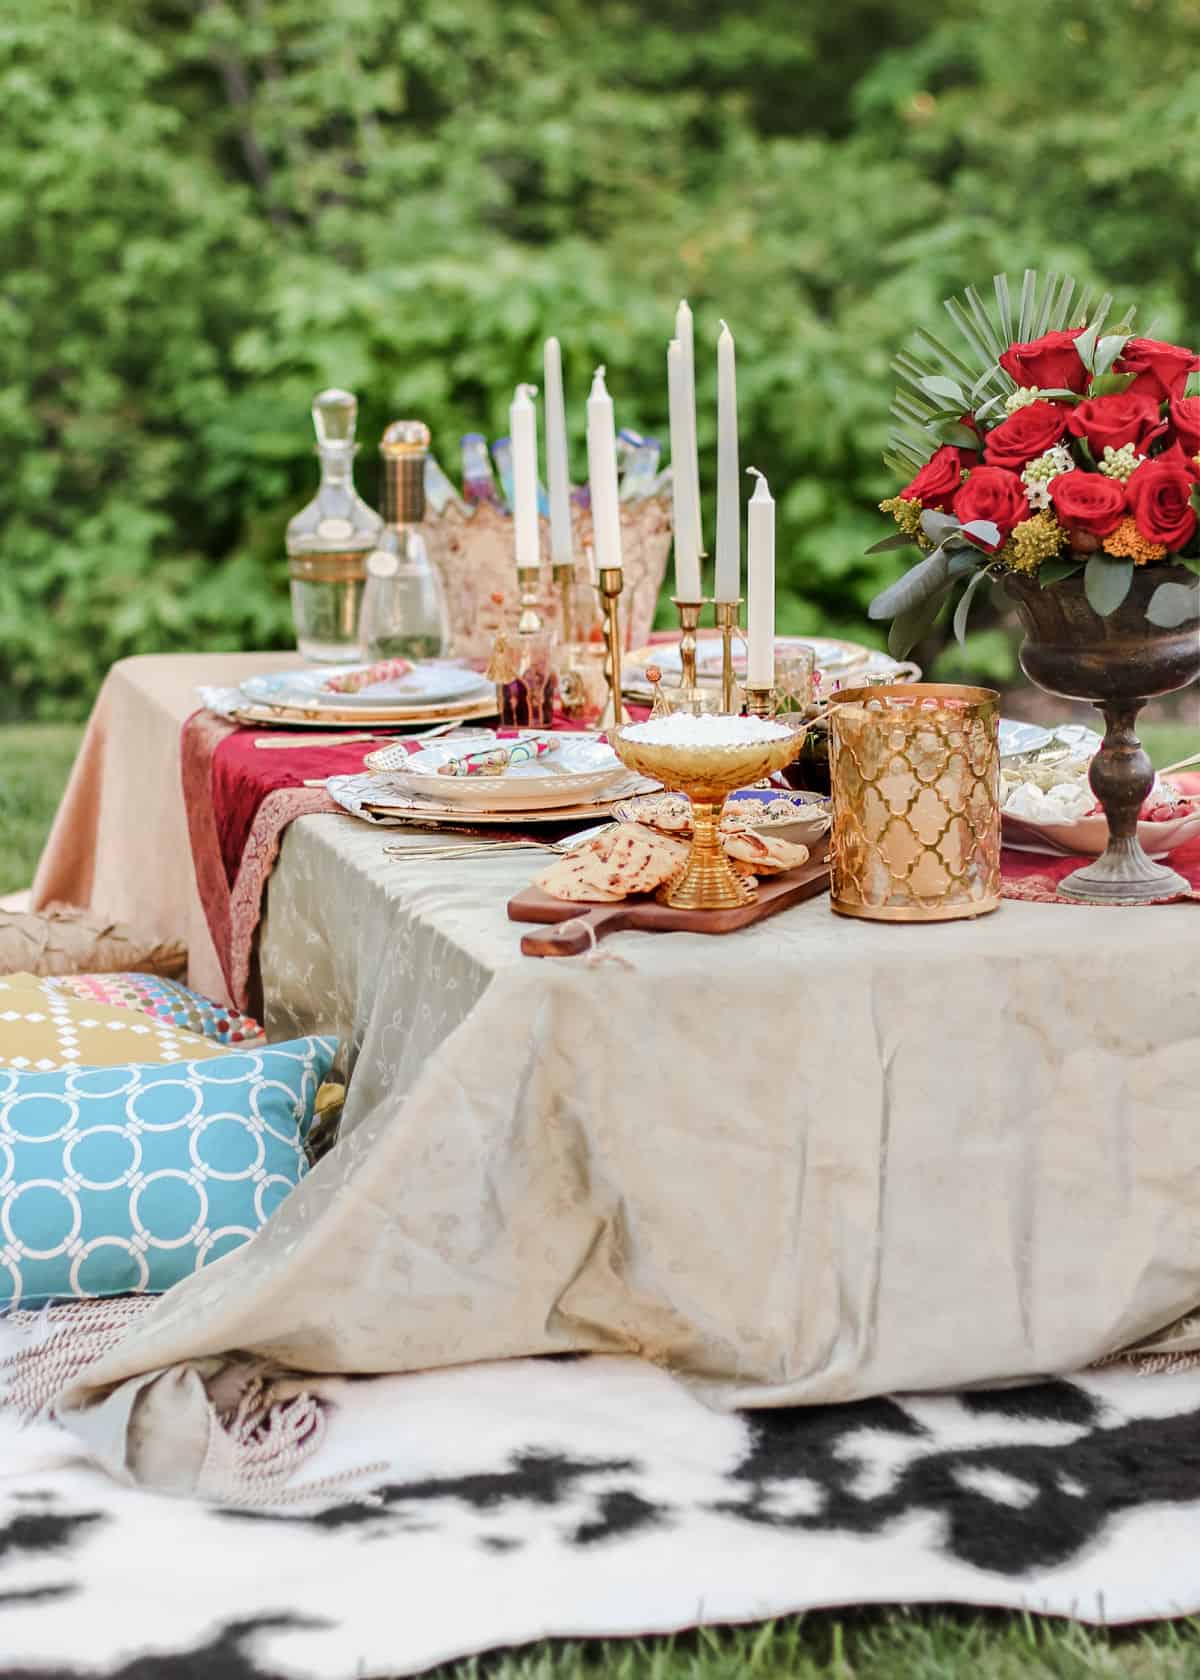 Moroccan themed table setting outdoors with floor seating.